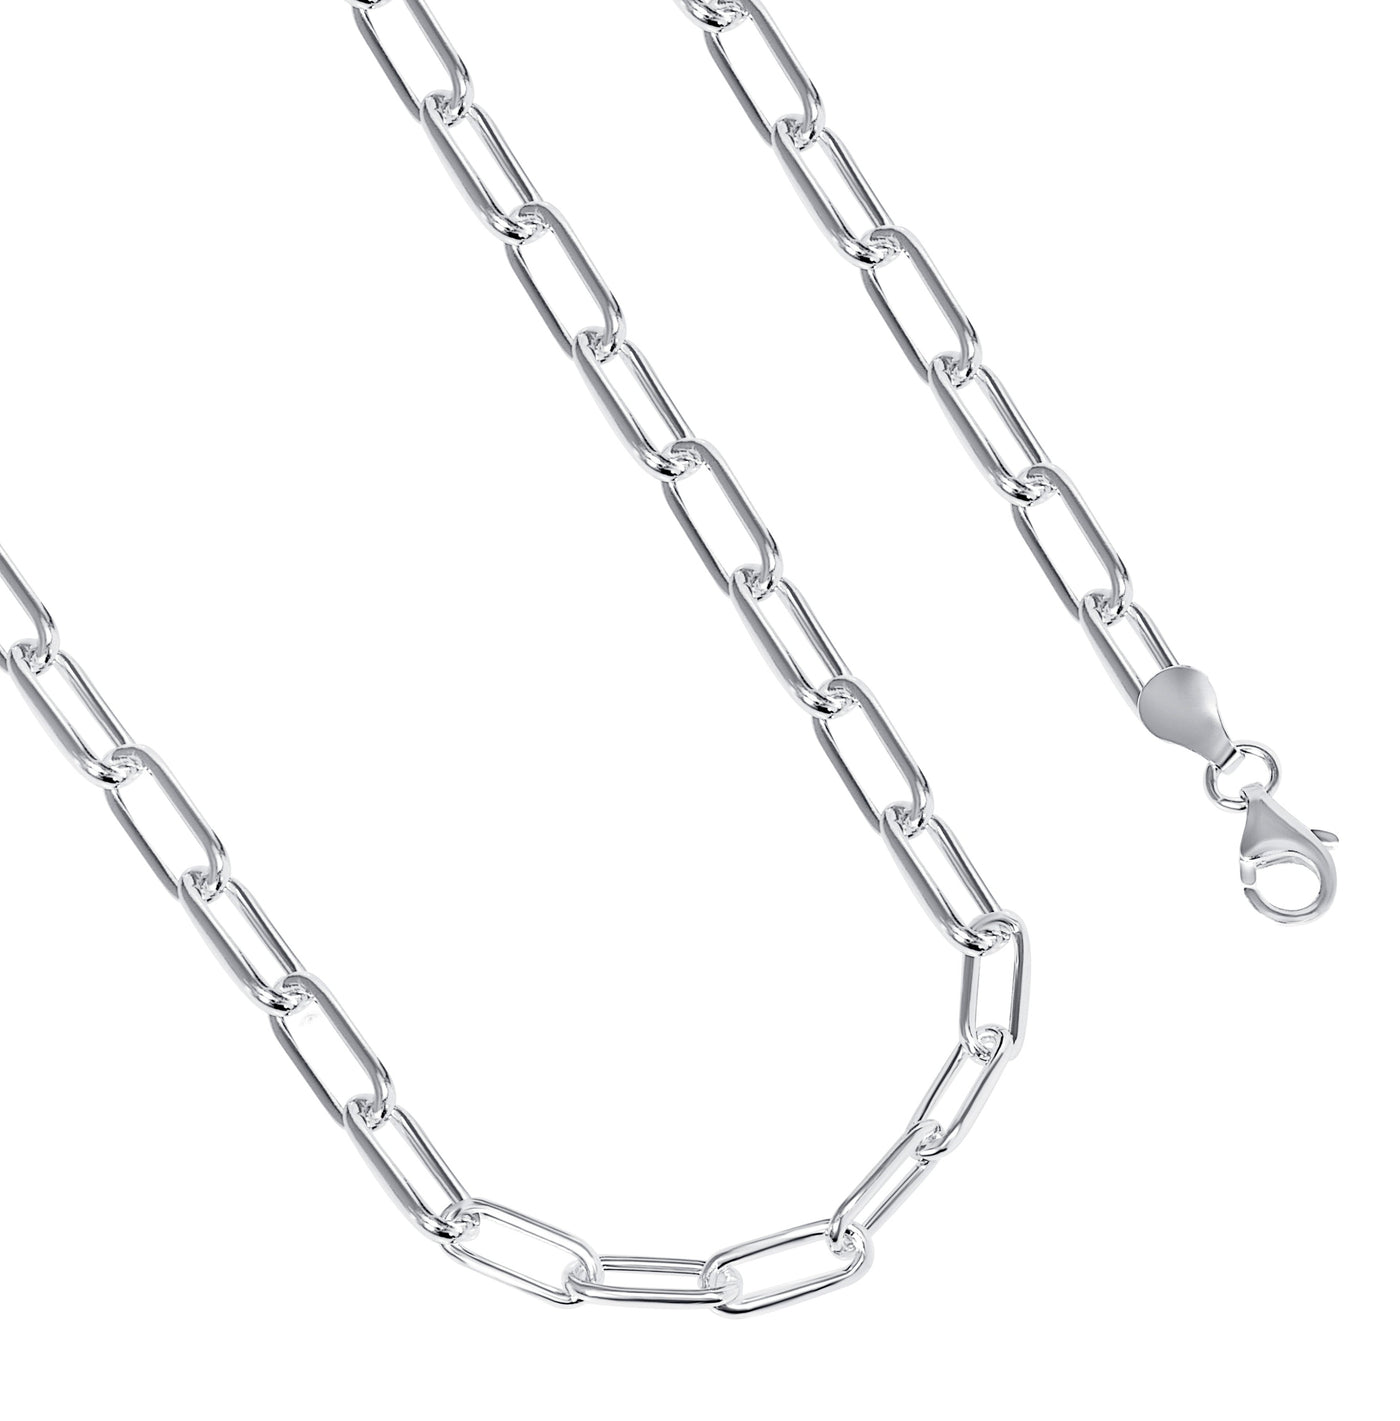 Italian Sterling Silver 4mm Paperclip Link Chain Necklace, 16"- 24"